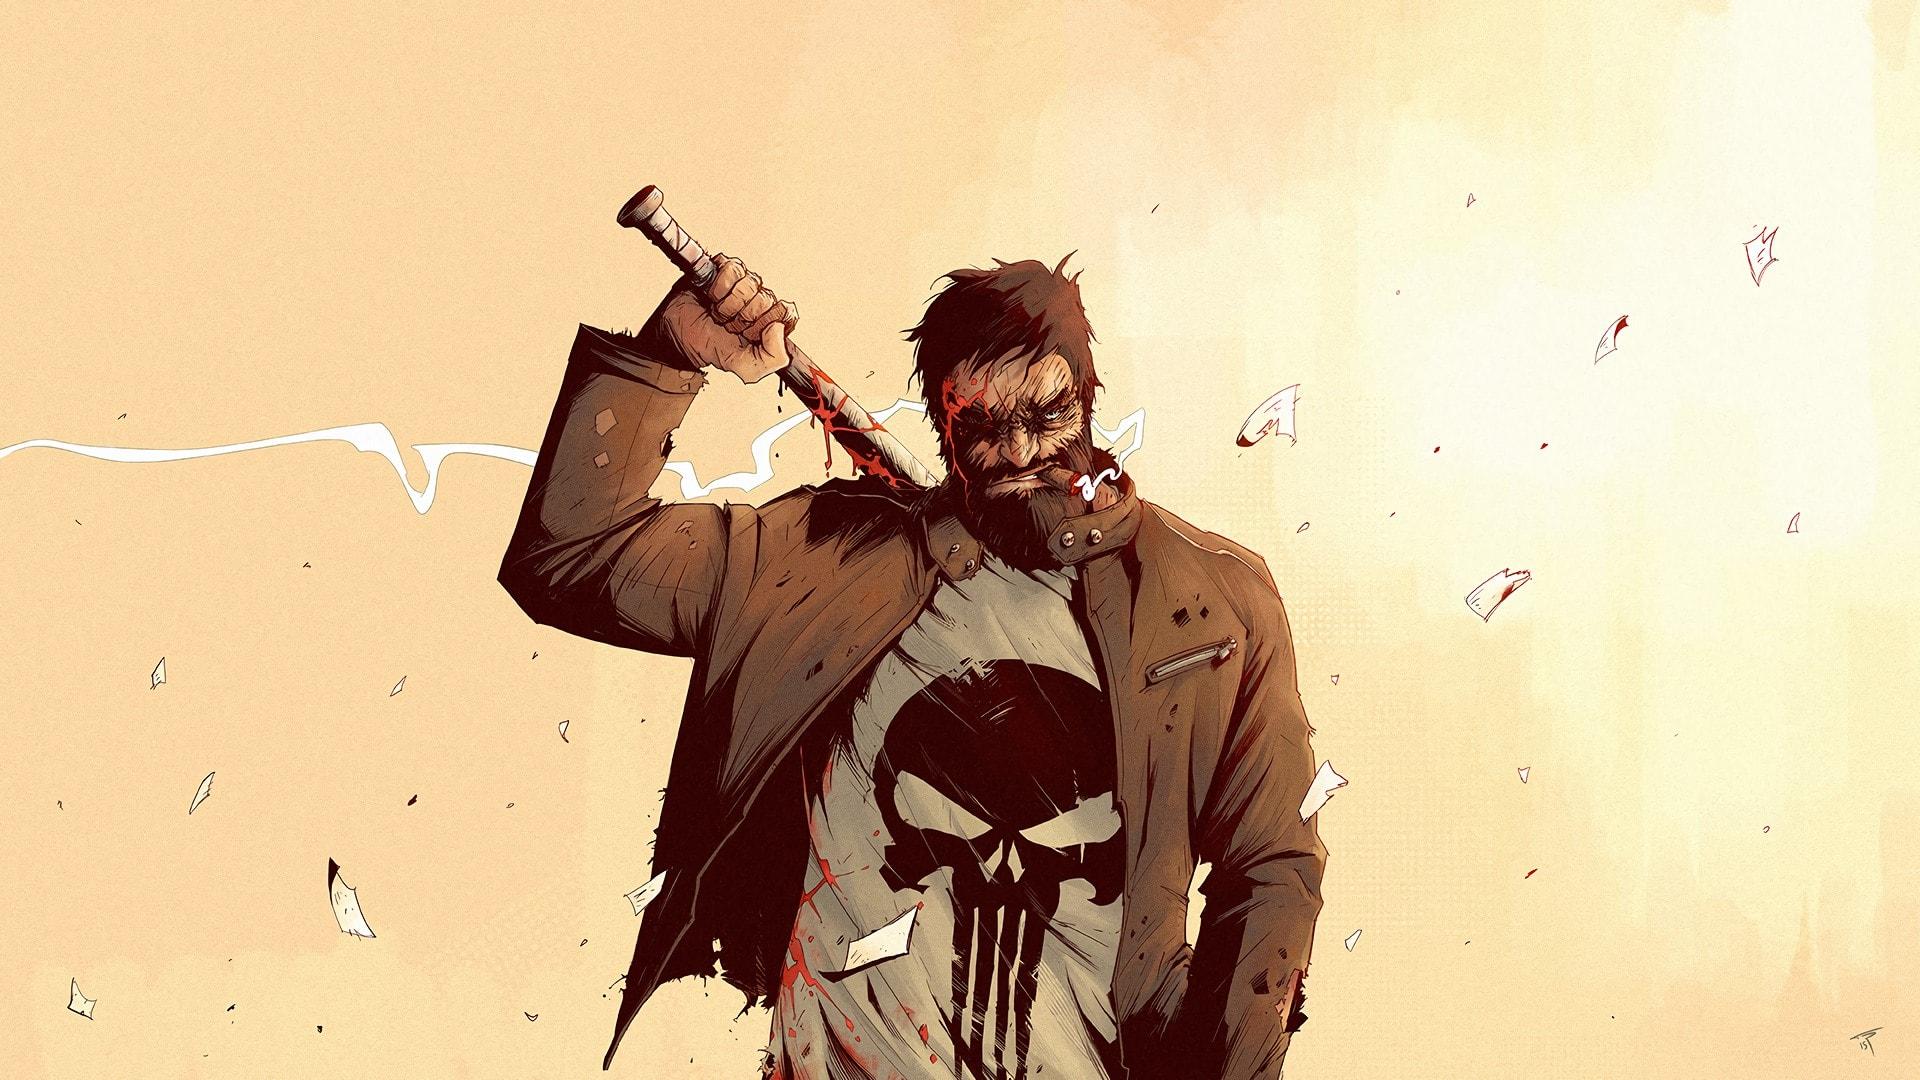 The Punisher Marvel Comics Artwork Wallpaper and Free Stock